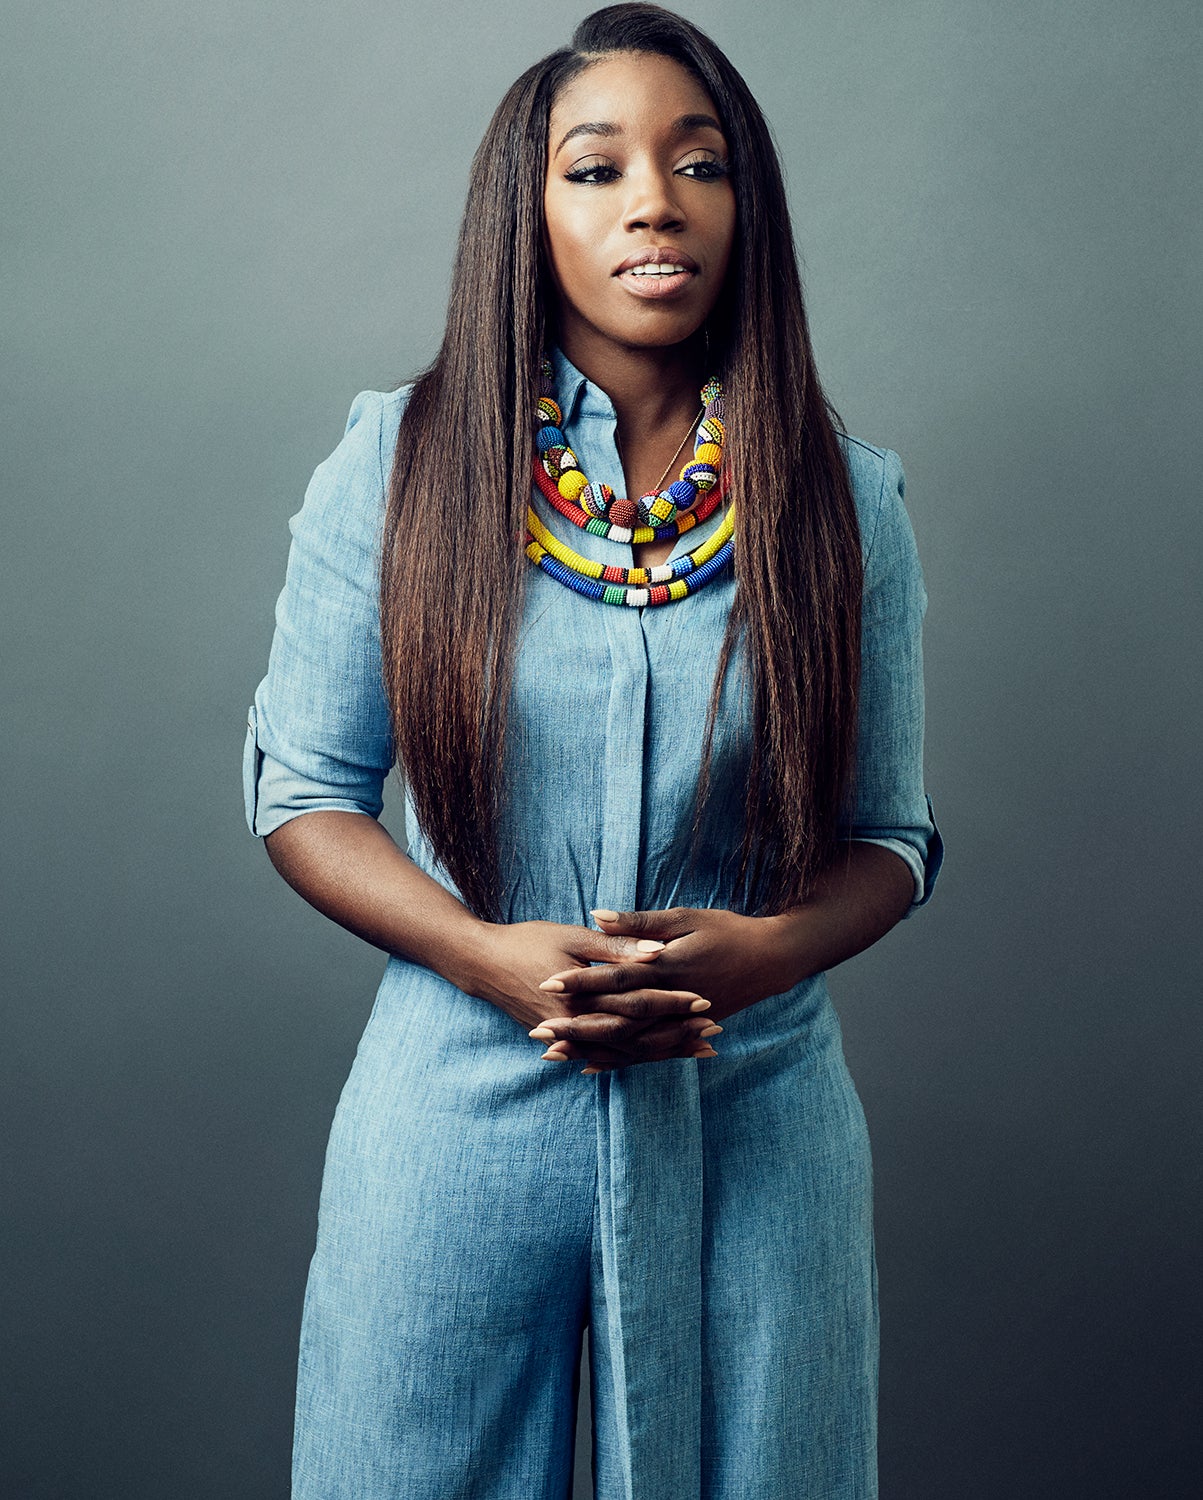 The Love Lessons That Inspired Estelle’s New Single ‘Love Like Ours’